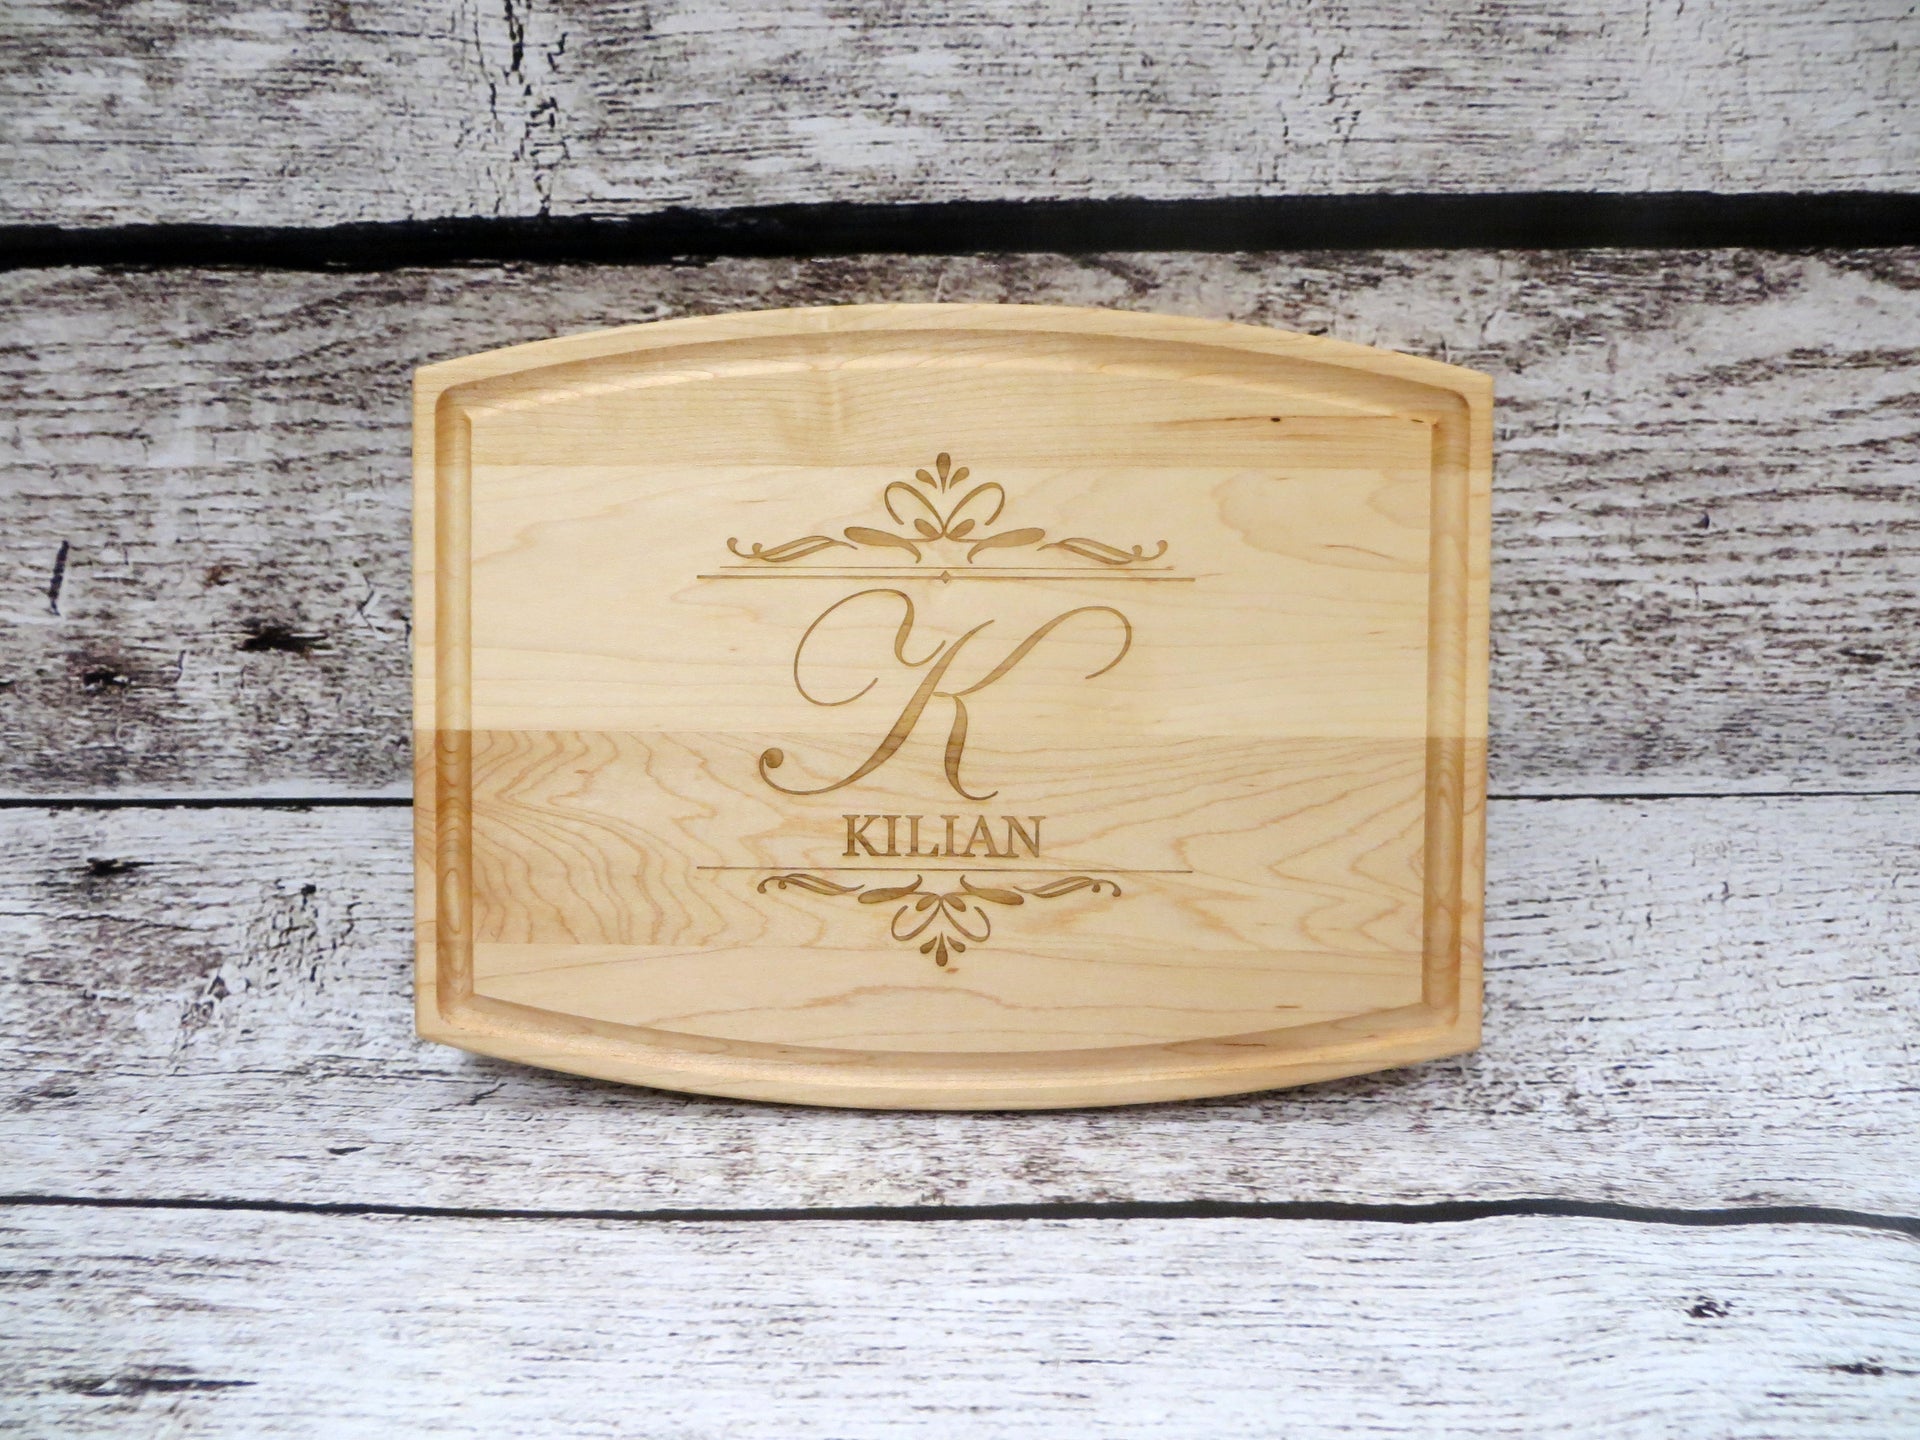 Custom Cutting Boards Wood Engraved Cutting Board Personalized, USA Made -  Thick Maple/Walnut Personalized Cutting Boards Wood Engraved, Personalized